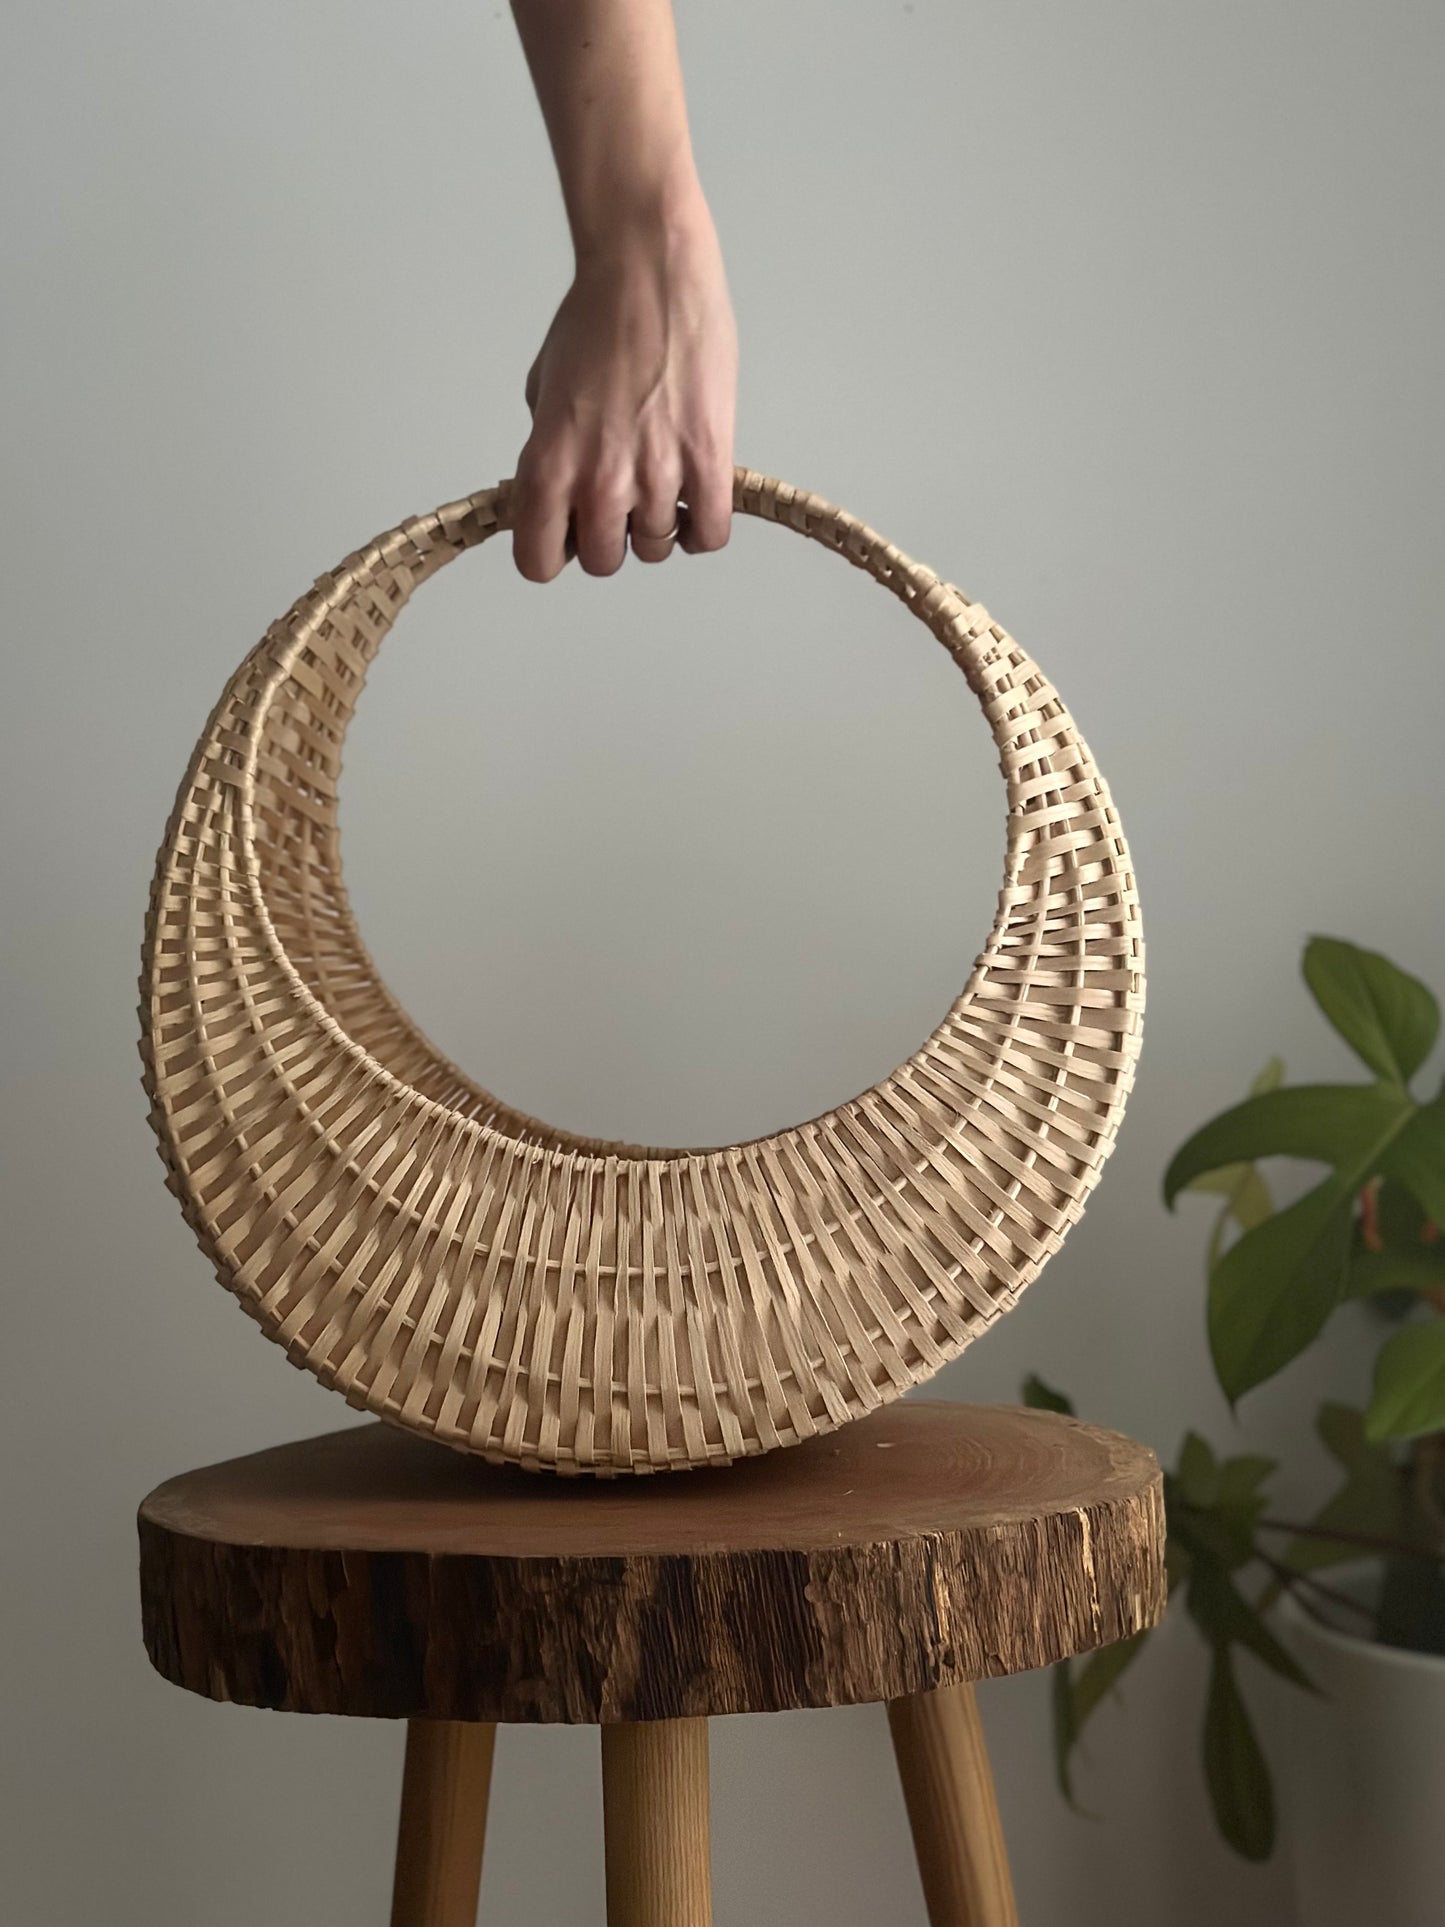 Waxing Crescent Basket Sculpture - MADE TO ORDER